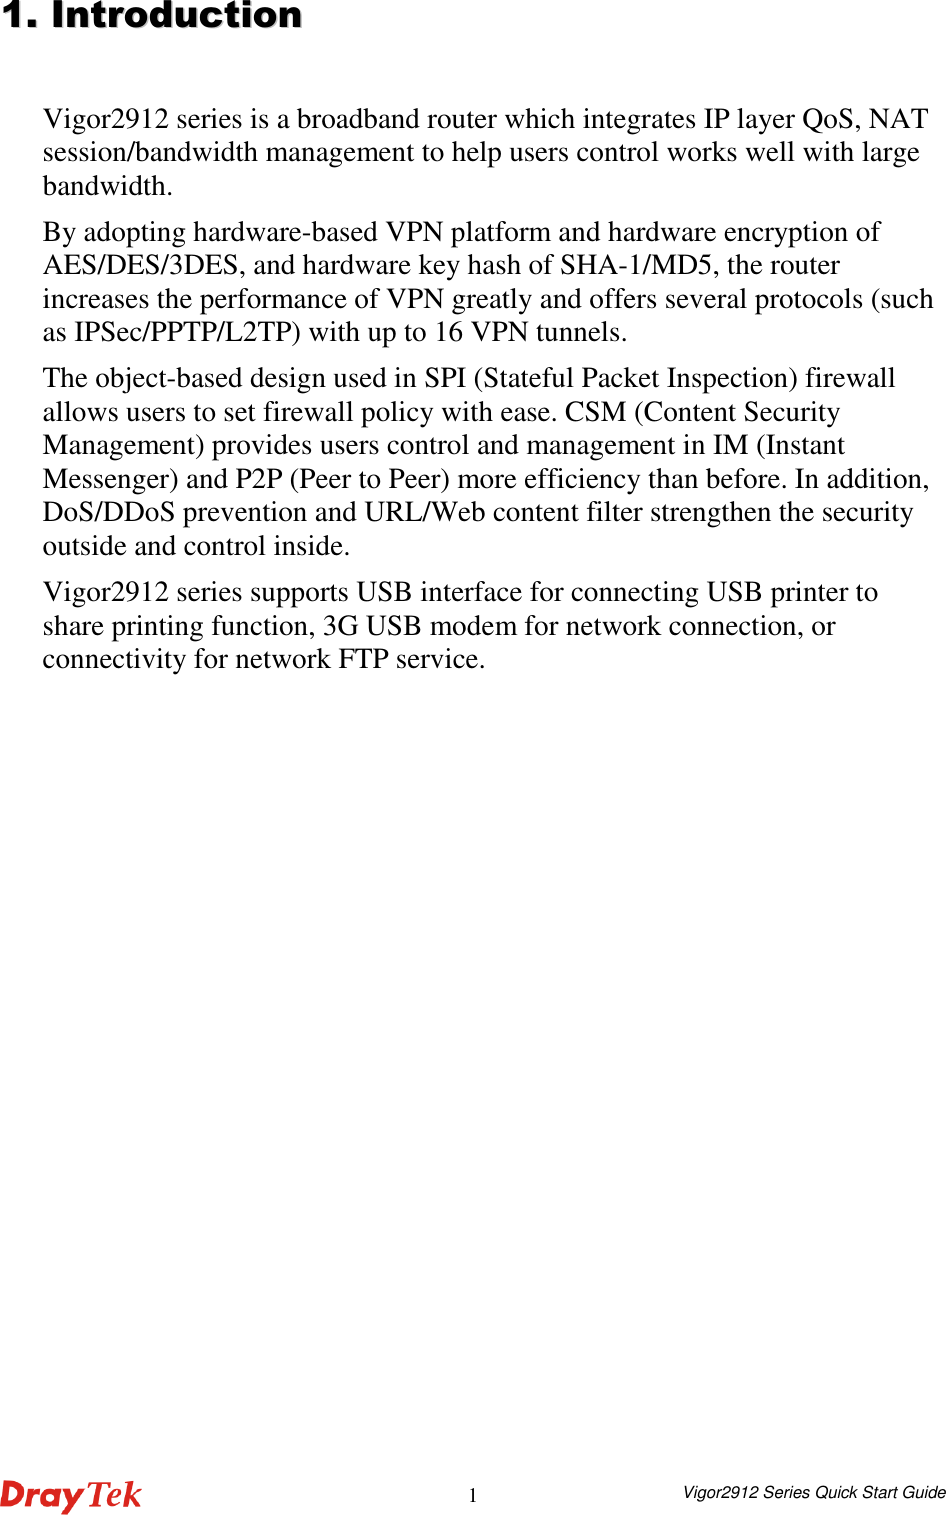  Vigor2912 Series Quick Start Guide 1 11..  IInnttrroodduuccttiioonn  Vigor2912 series is a broadband router which integrates IP layer QoS, NAT session/bandwidth management to help users control works well with large bandwidth. By adopting hardware-based VPN platform and hardware encryption of AES/DES/3DES, and hardware key hash of SHA-1/MD5, the router increases the performance of VPN greatly and offers several protocols (such as IPSec/PPTP/L2TP) with up to 16 VPN tunnels. The object-based design used in SPI (Stateful Packet Inspection) firewall allows users to set firewall policy with ease. CSM (Content Security Management) provides users control and management in IM (Instant Messenger) and P2P (Peer to Peer) more efficiency than before. In addition, DoS/DDoS prevention and URL/Web content filter strengthen the security outside and control inside. Vigor2912 series supports USB interface for connecting USB printer to share printing function, 3G USB modem for network connection, or connectivity for network FTP service.    